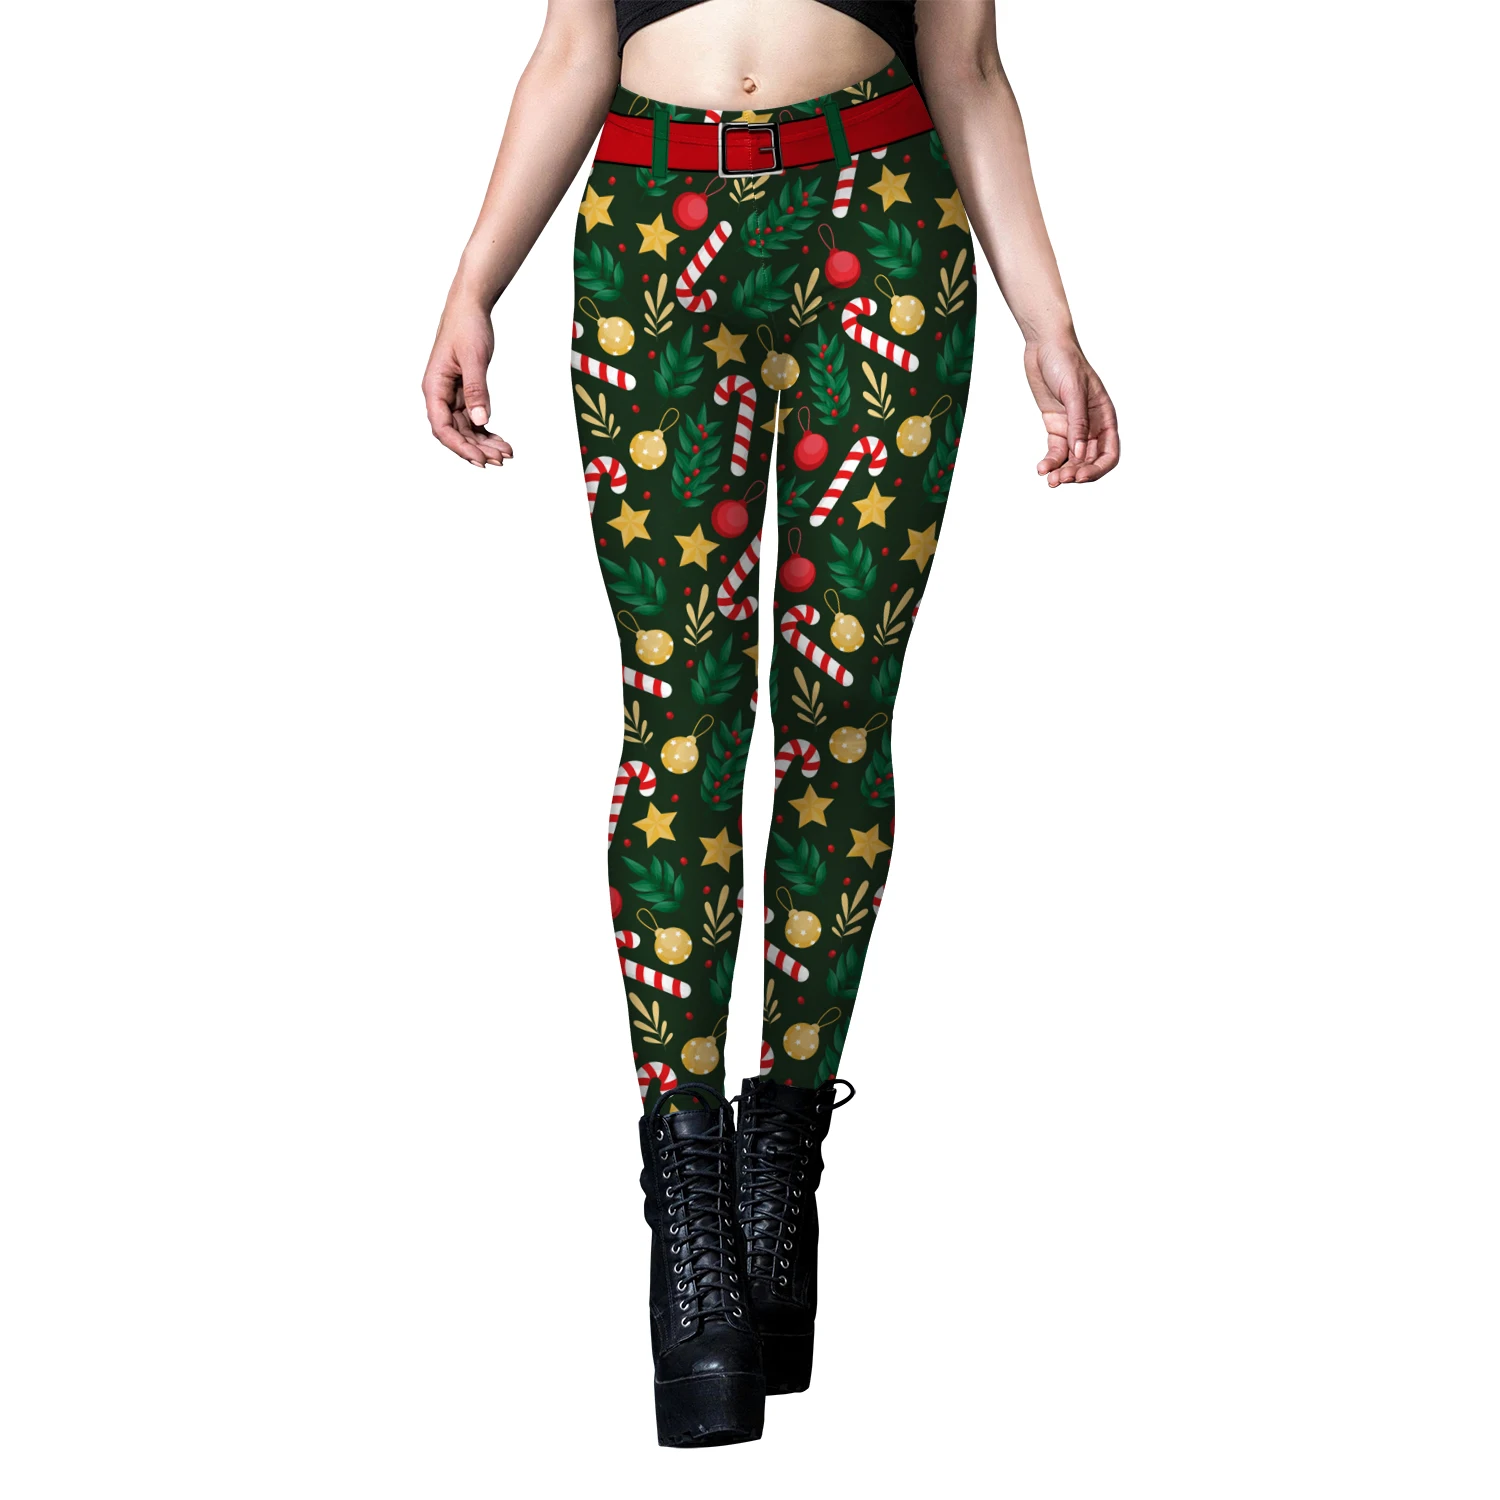 New Leggings for Women Christmas Fashion Cute Creative Xmas Trousers Snowflake Print Casual Leggings Sports Cosplay Partywear images - 5